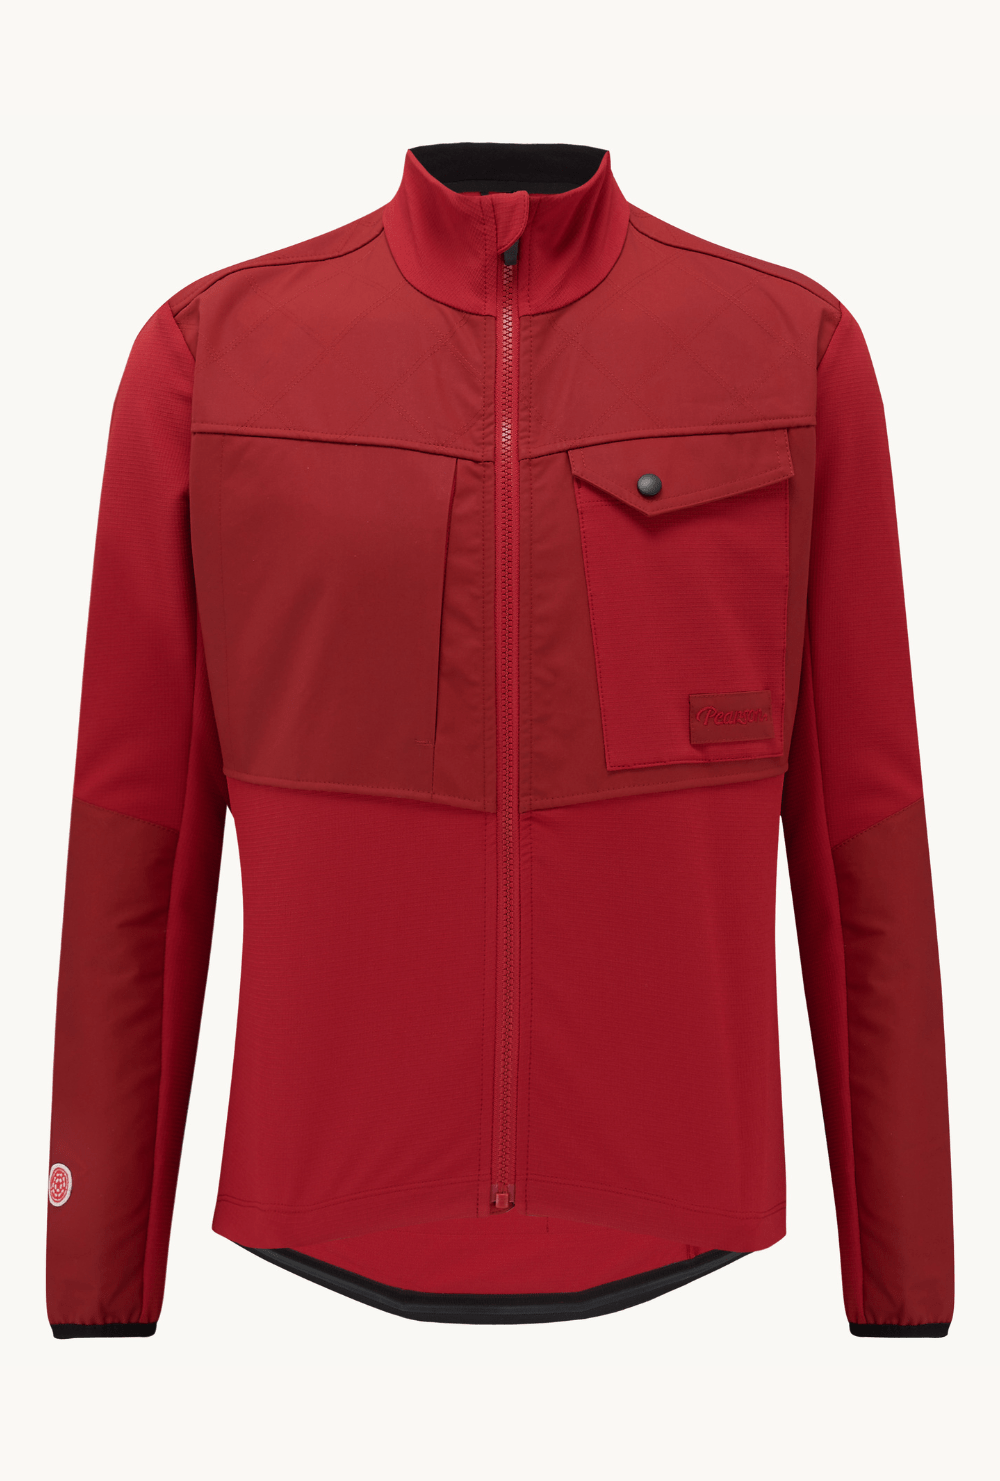 Pearson 1860  Because Its There - Red Adventure Long Sleeve Cycling Jacket  Cherry Red / Medium